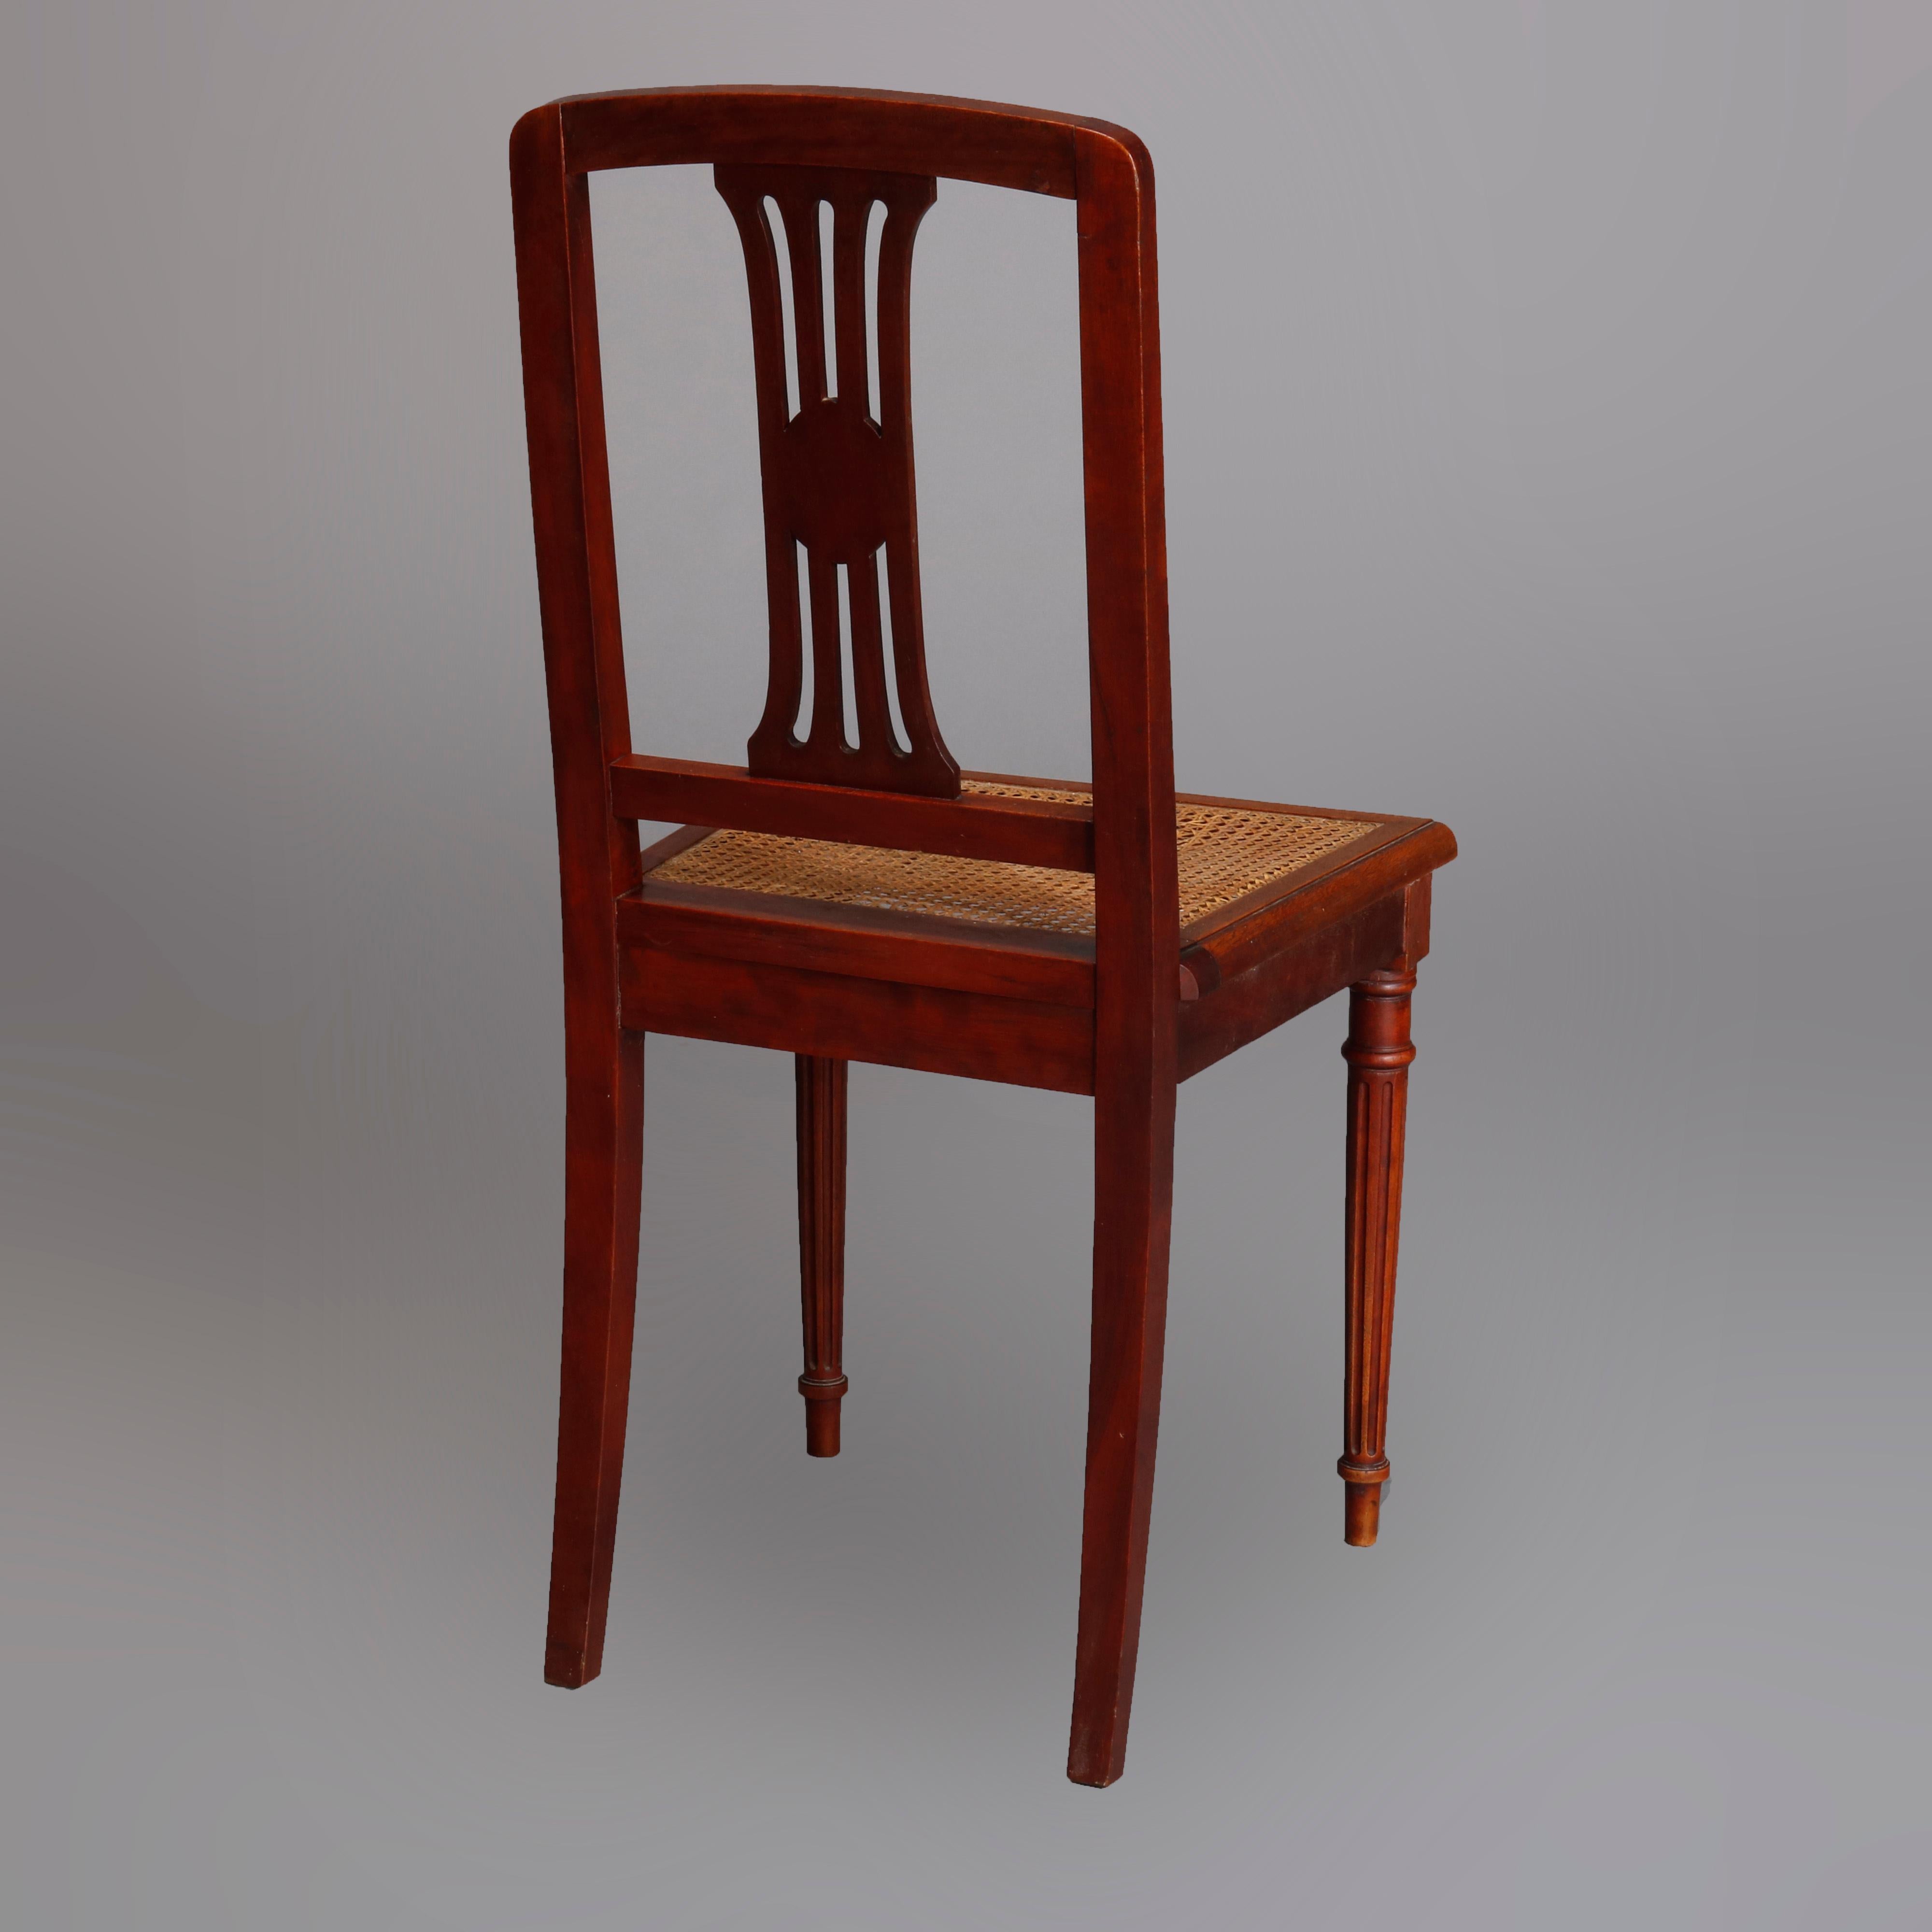 Six Antique French Louis XVI Mahogany Cane Seat Chairs, Early 20th Century For Sale 3